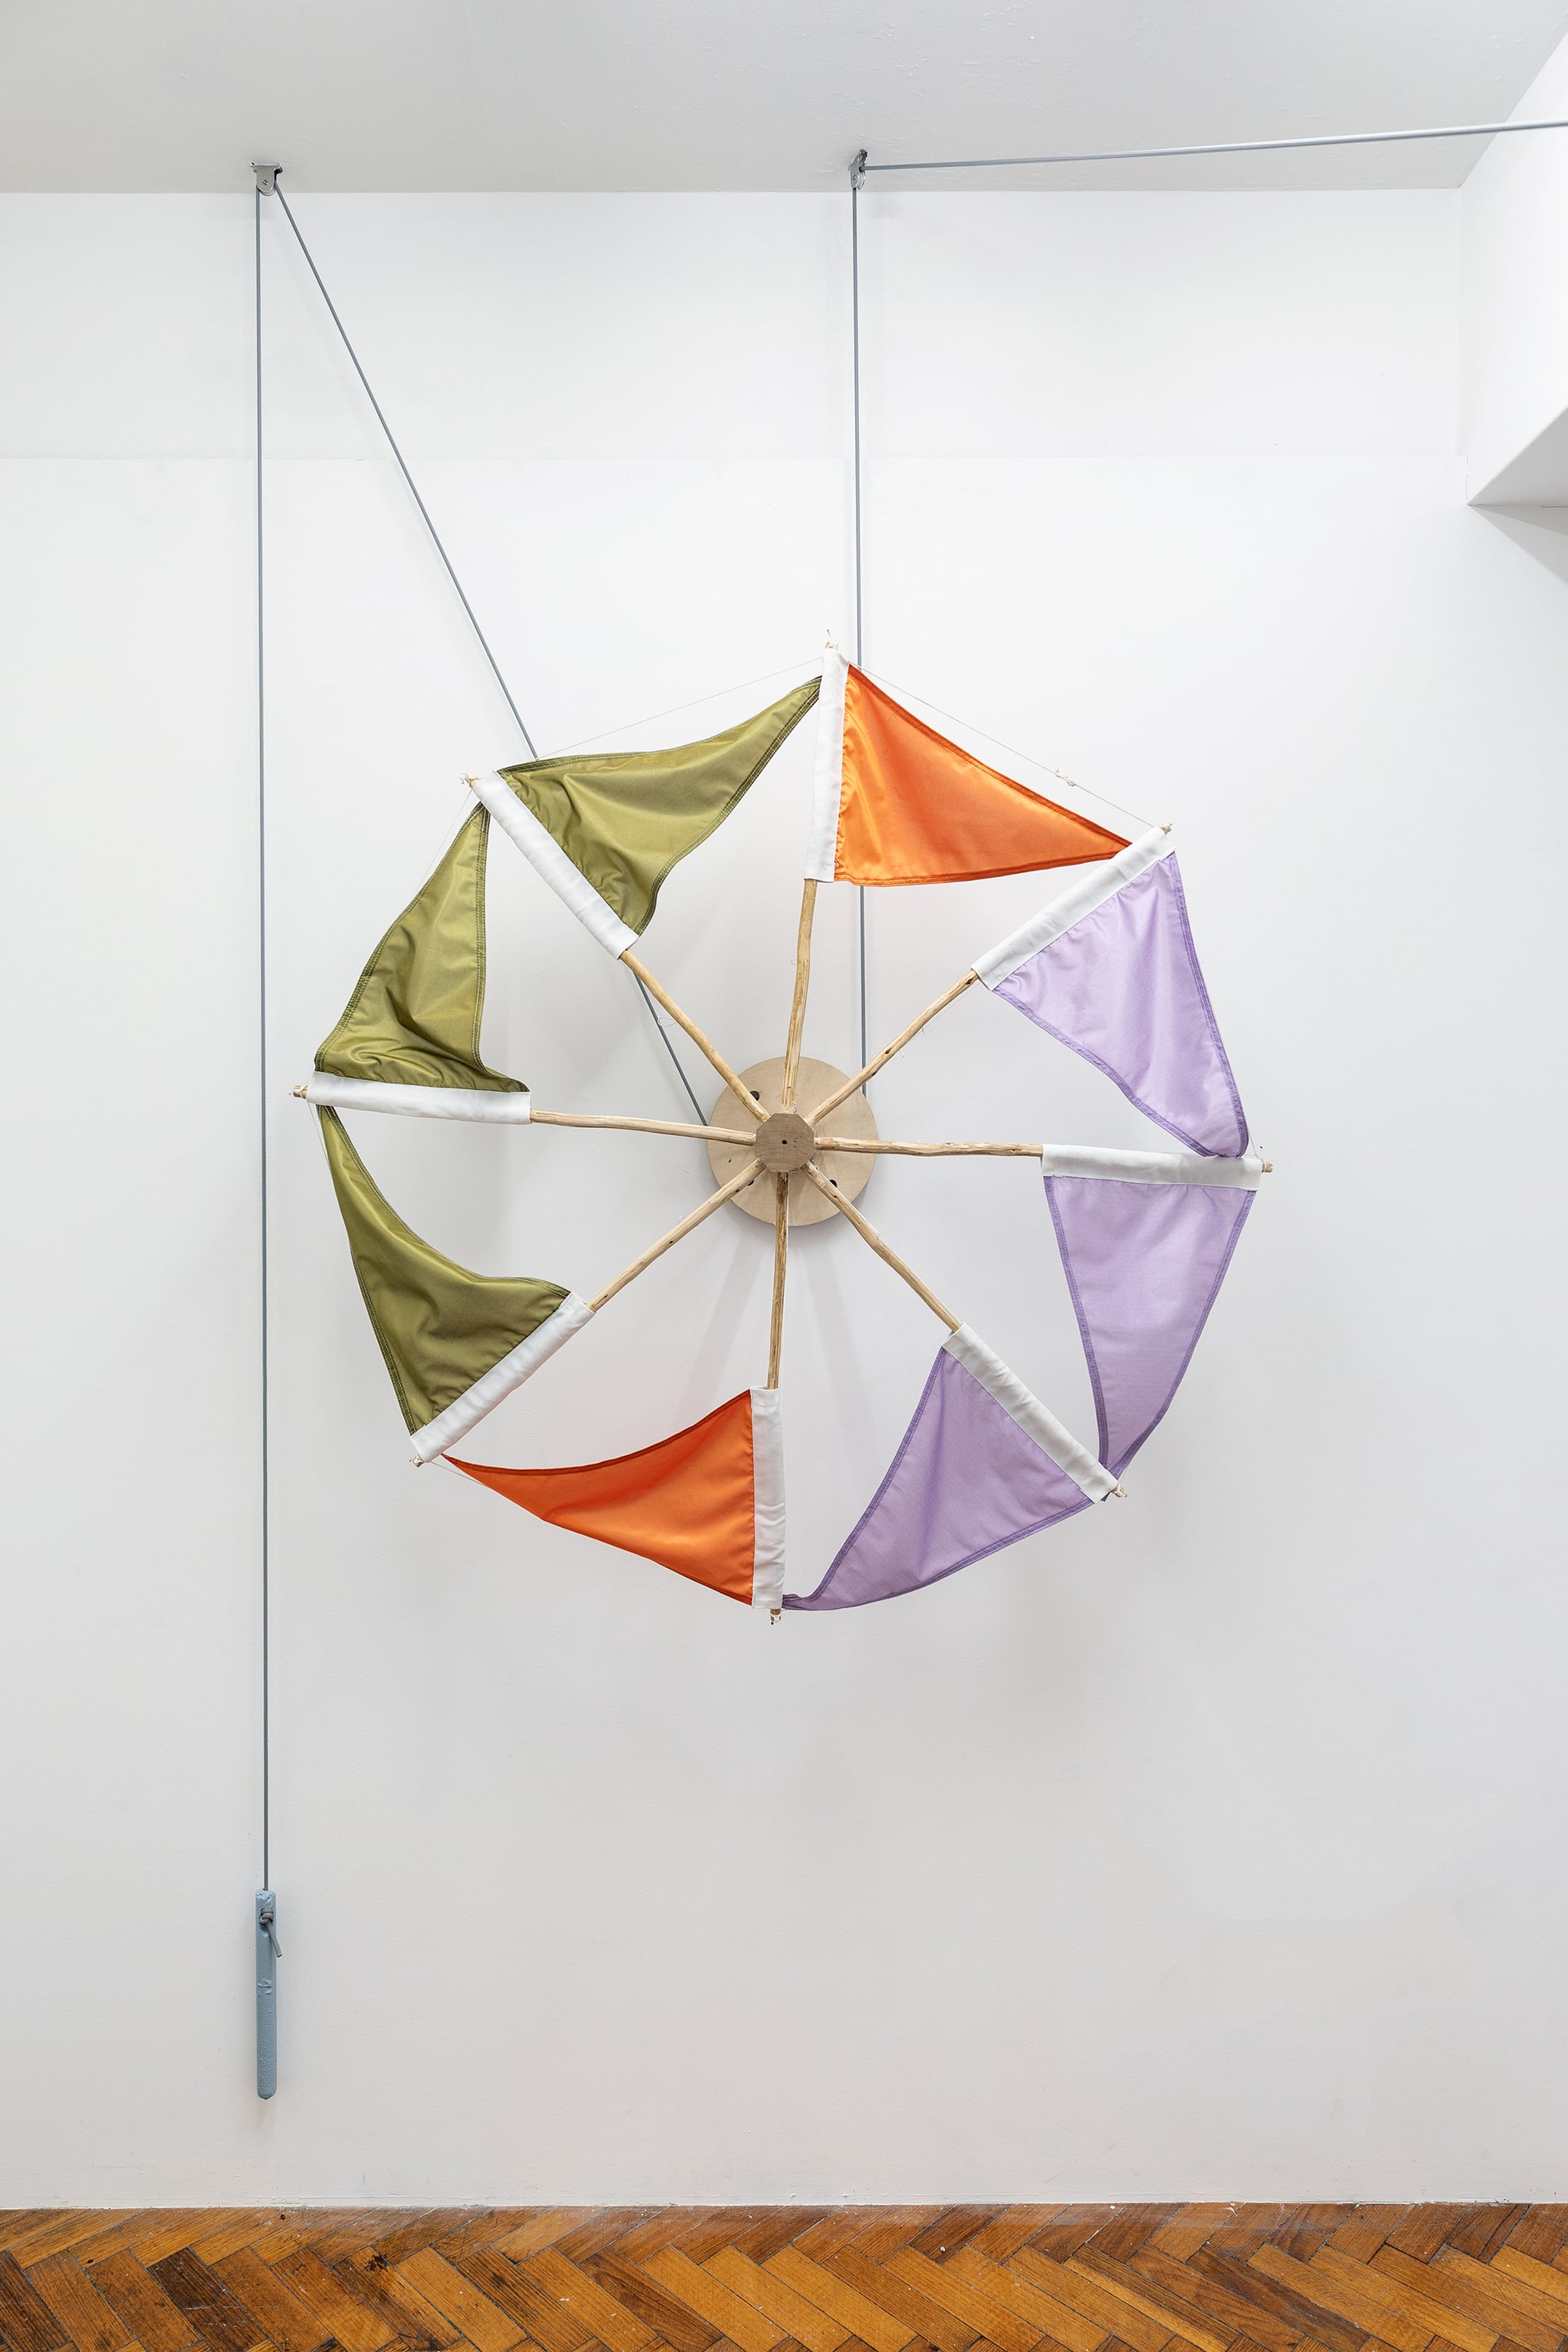 Image 02: Nadine Christensen, Signal Decoy (2018), synthetic and cotton printed fabric, sapling, plywood, cast iron, polycotton rope, aluminium pulley mechanismDimensions variable. Courtesy the artist and Sarah Scout Presents, Melbourne. Photography: Andrew Curtis.